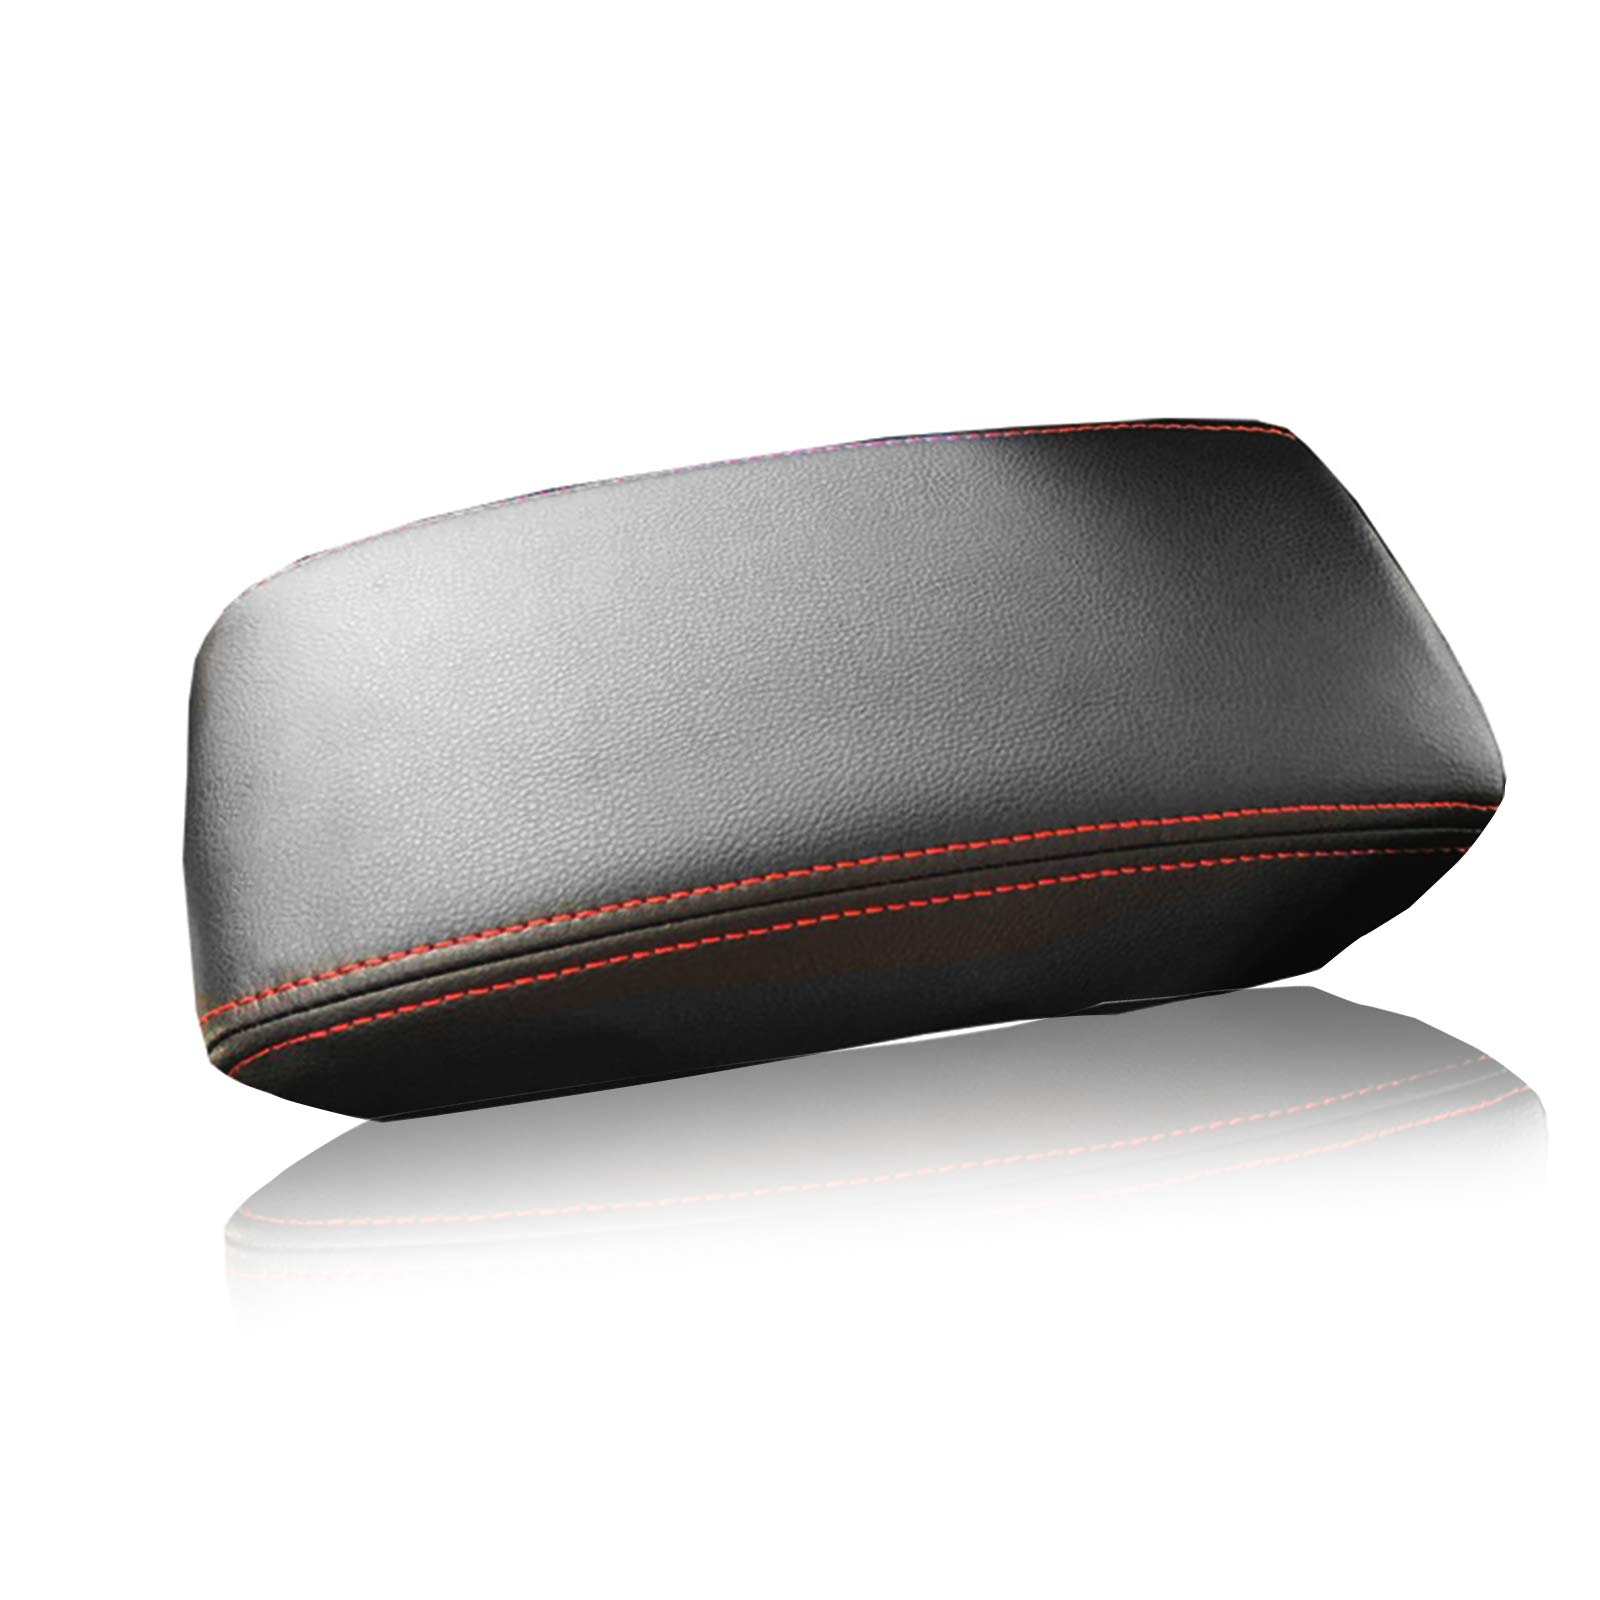 OxoxO Black Car Center Console Armrest Cover Car Armrest Seat Box Cover Protector Compatible with Golf 7 Golf Mk7 2013-2020 Car Armrest Cover in Leather (Red Line) von OxoxO